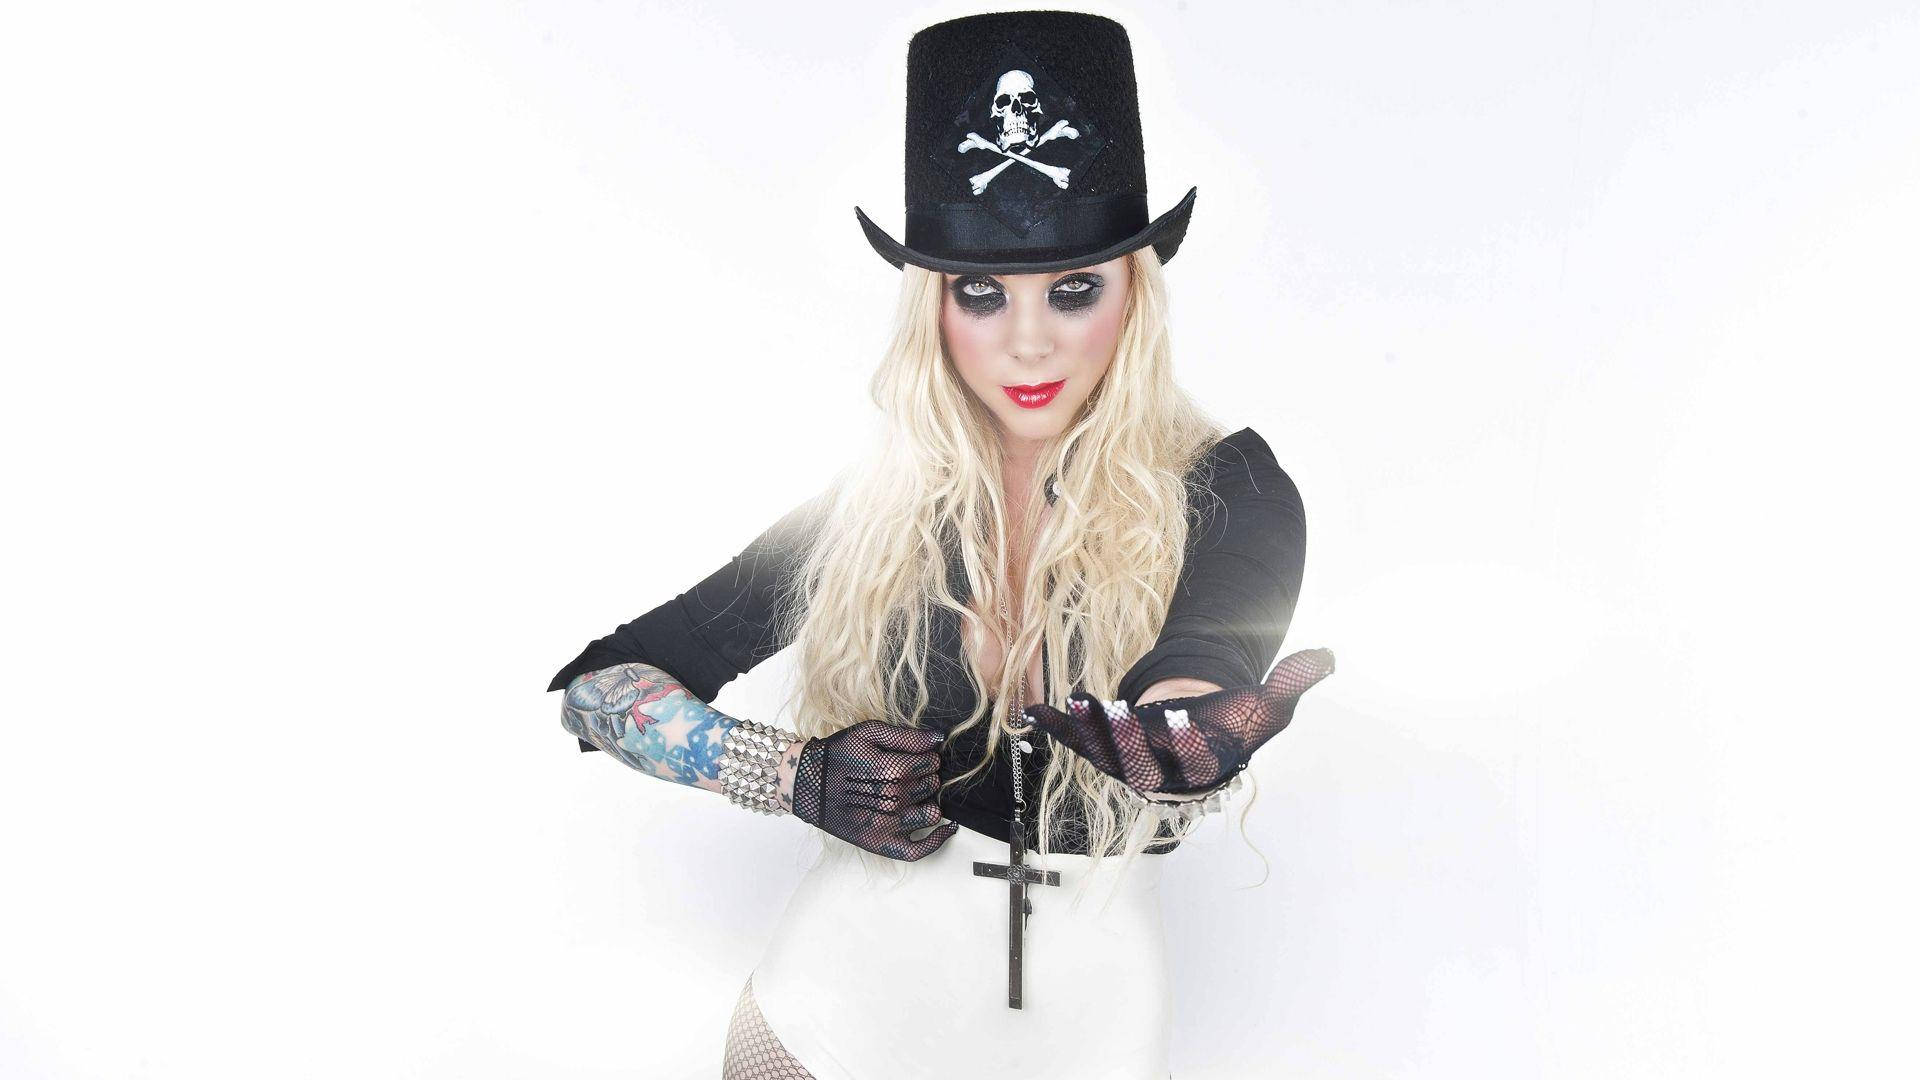 Maria Brink, The Dynamic Singer Of In This Moment In Action